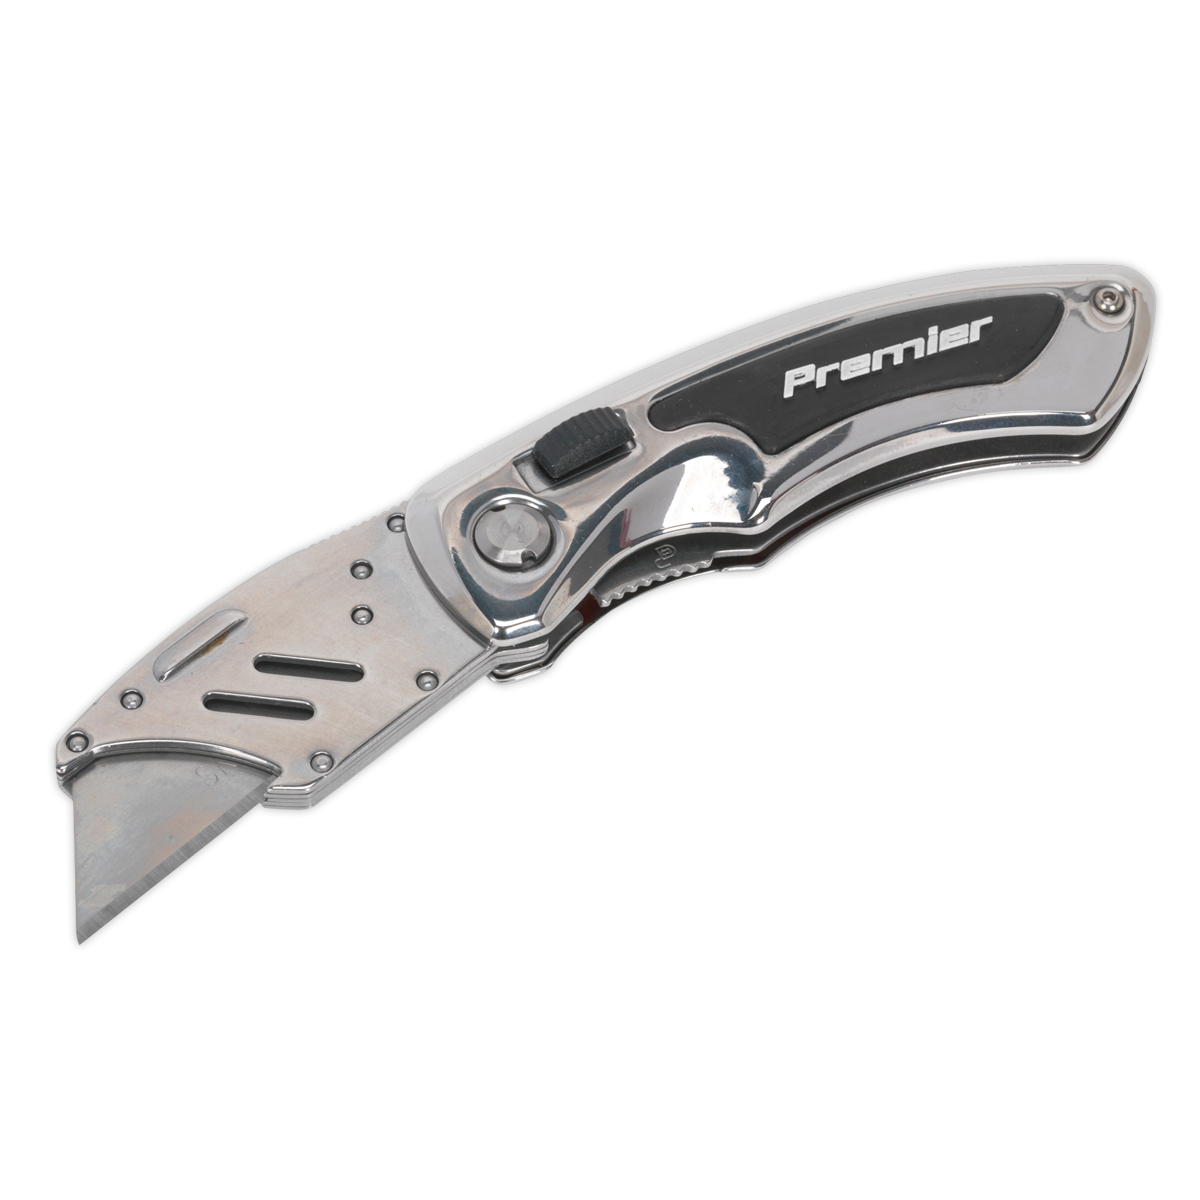 Sealey Locking Pocket Knife with Quick Change Blade